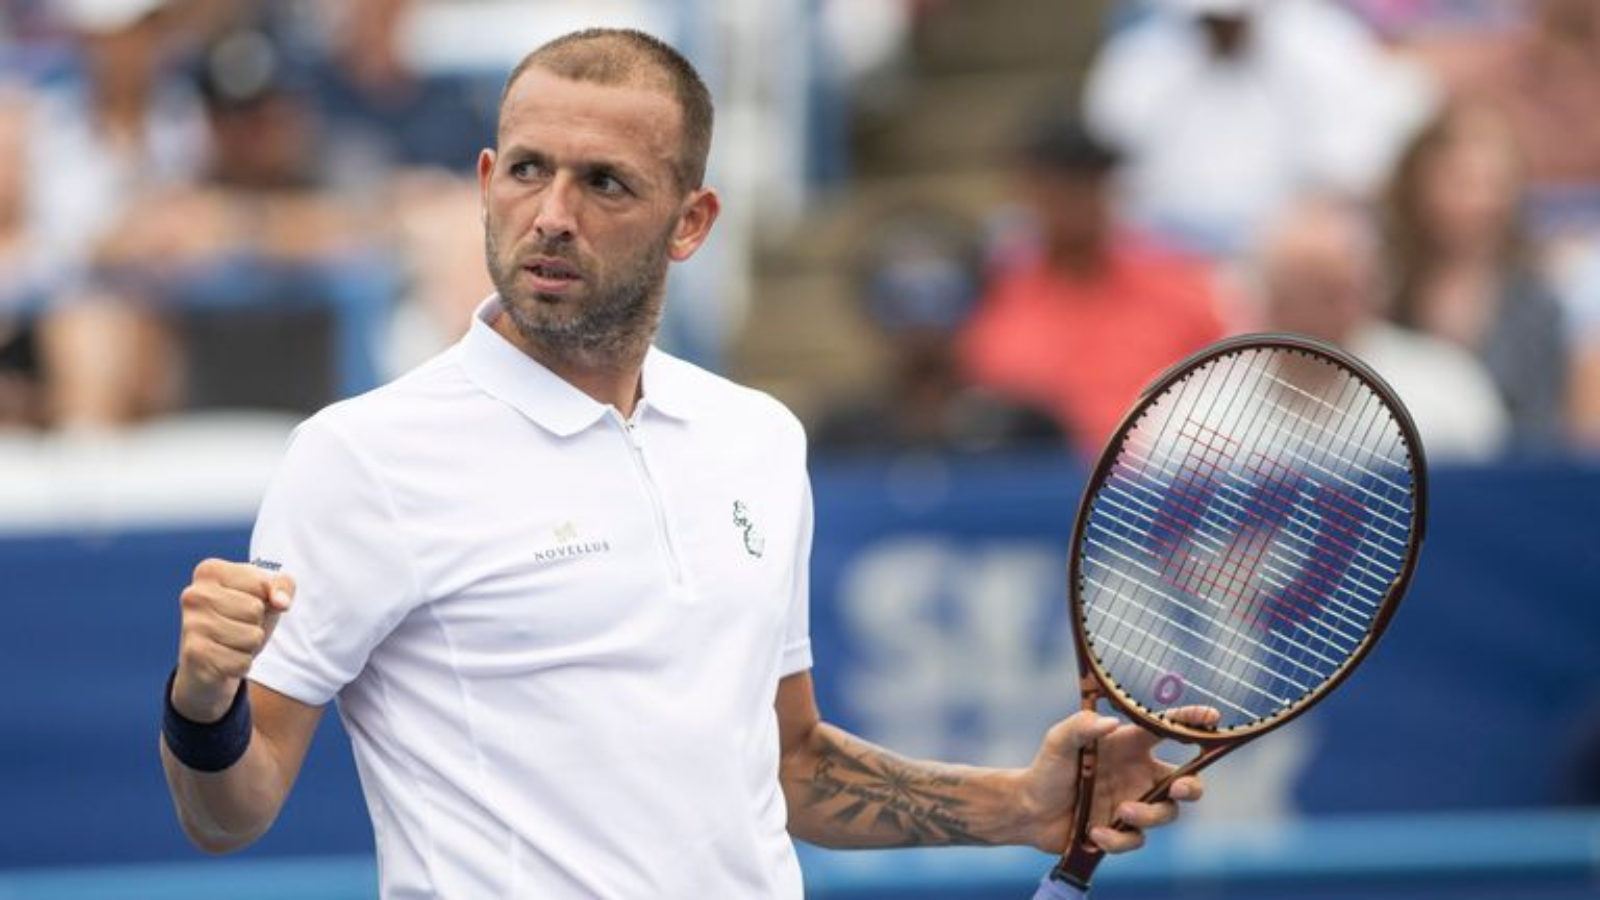 Dan Evans wins his first ATP 500 title in Washington DC